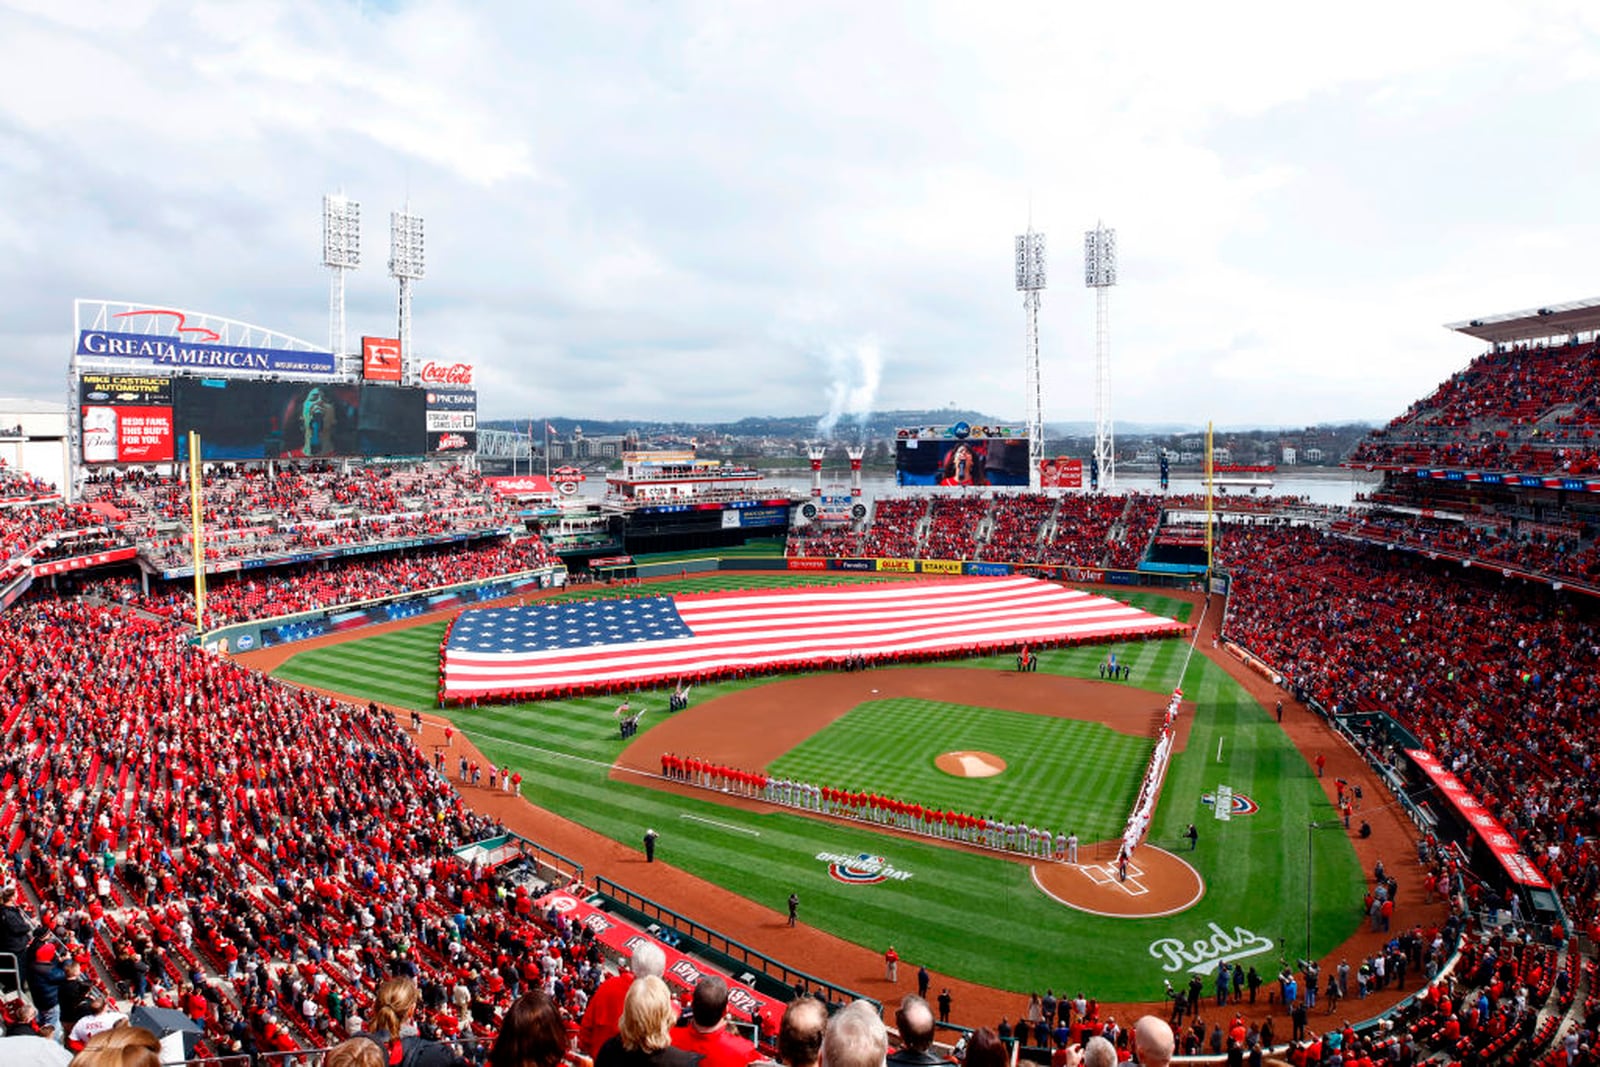 Reds Opening Day in full swing, full day of festivities planned for